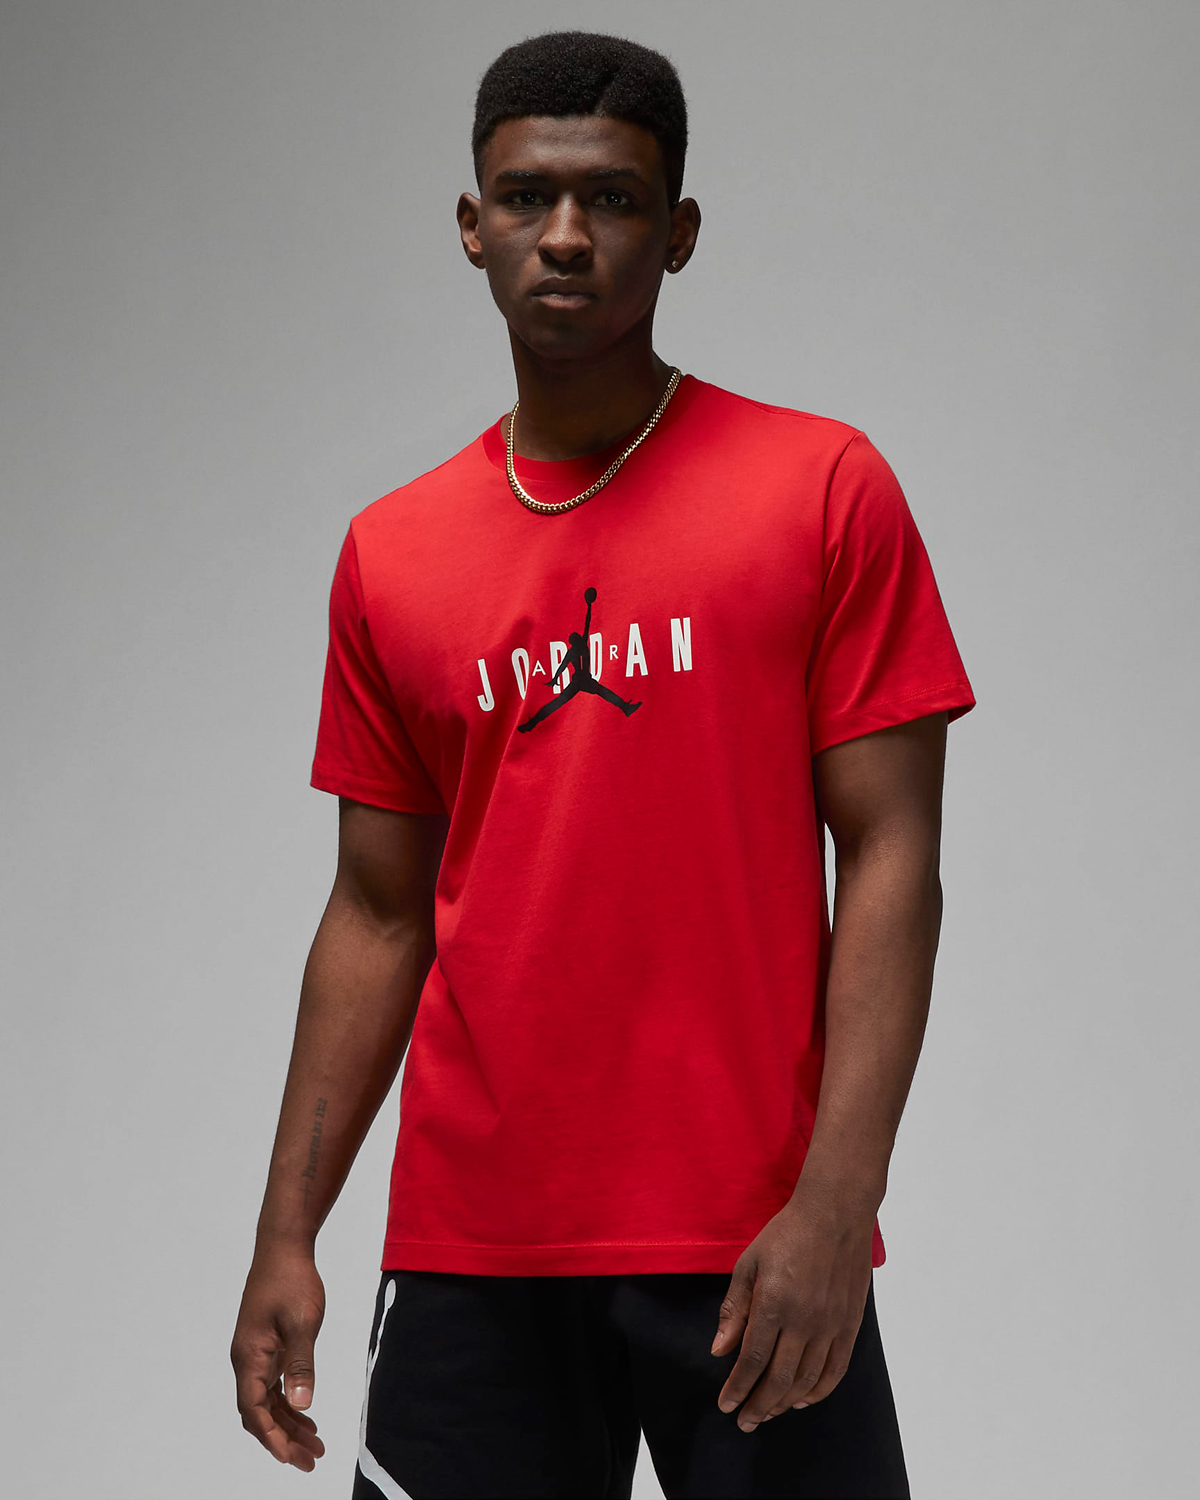 Jordan Fire Red Shirts Clothing Sneaker Outfits